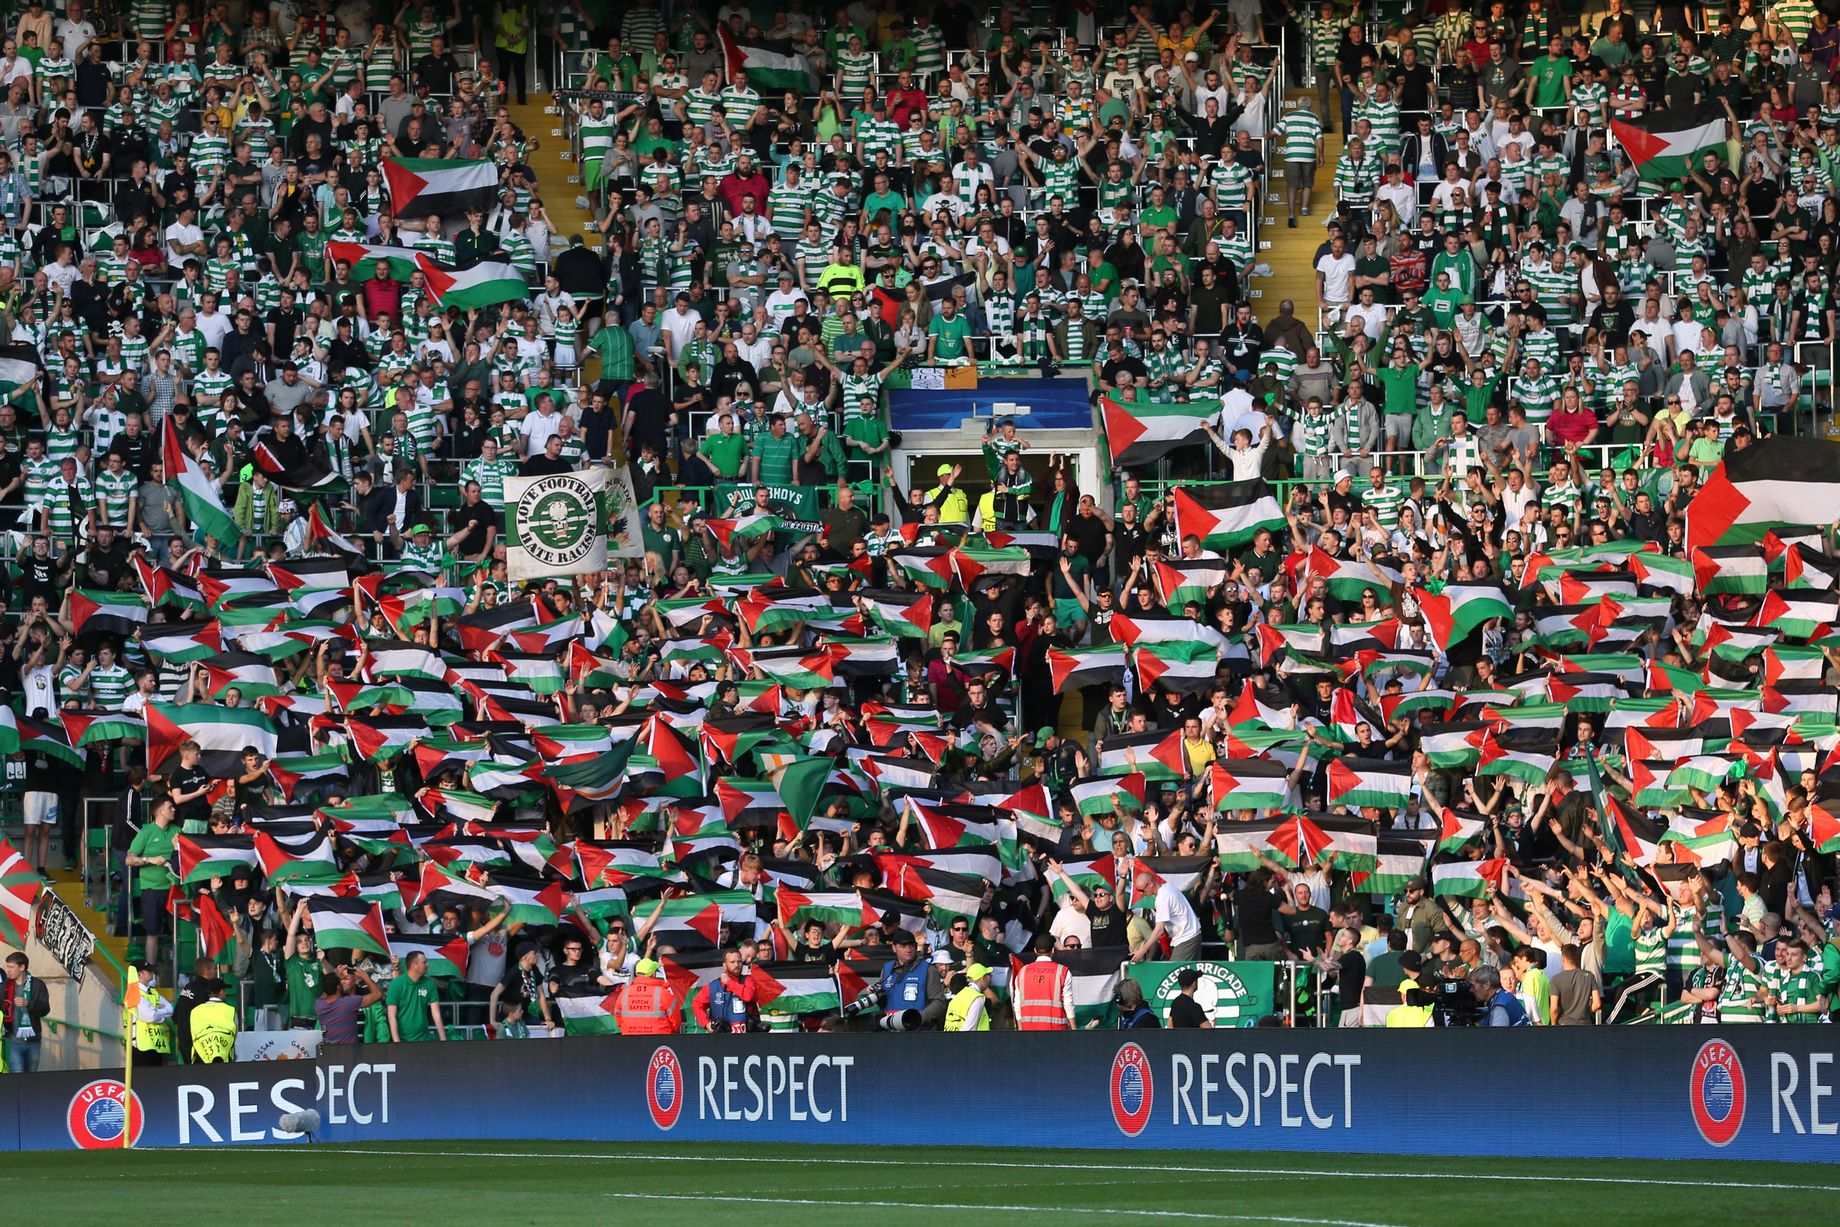 Celtic FC fans hold up Palestinian flags during a match against Israeli football team Hapoel Beer Sheva in 2016. Photo: Reuters.